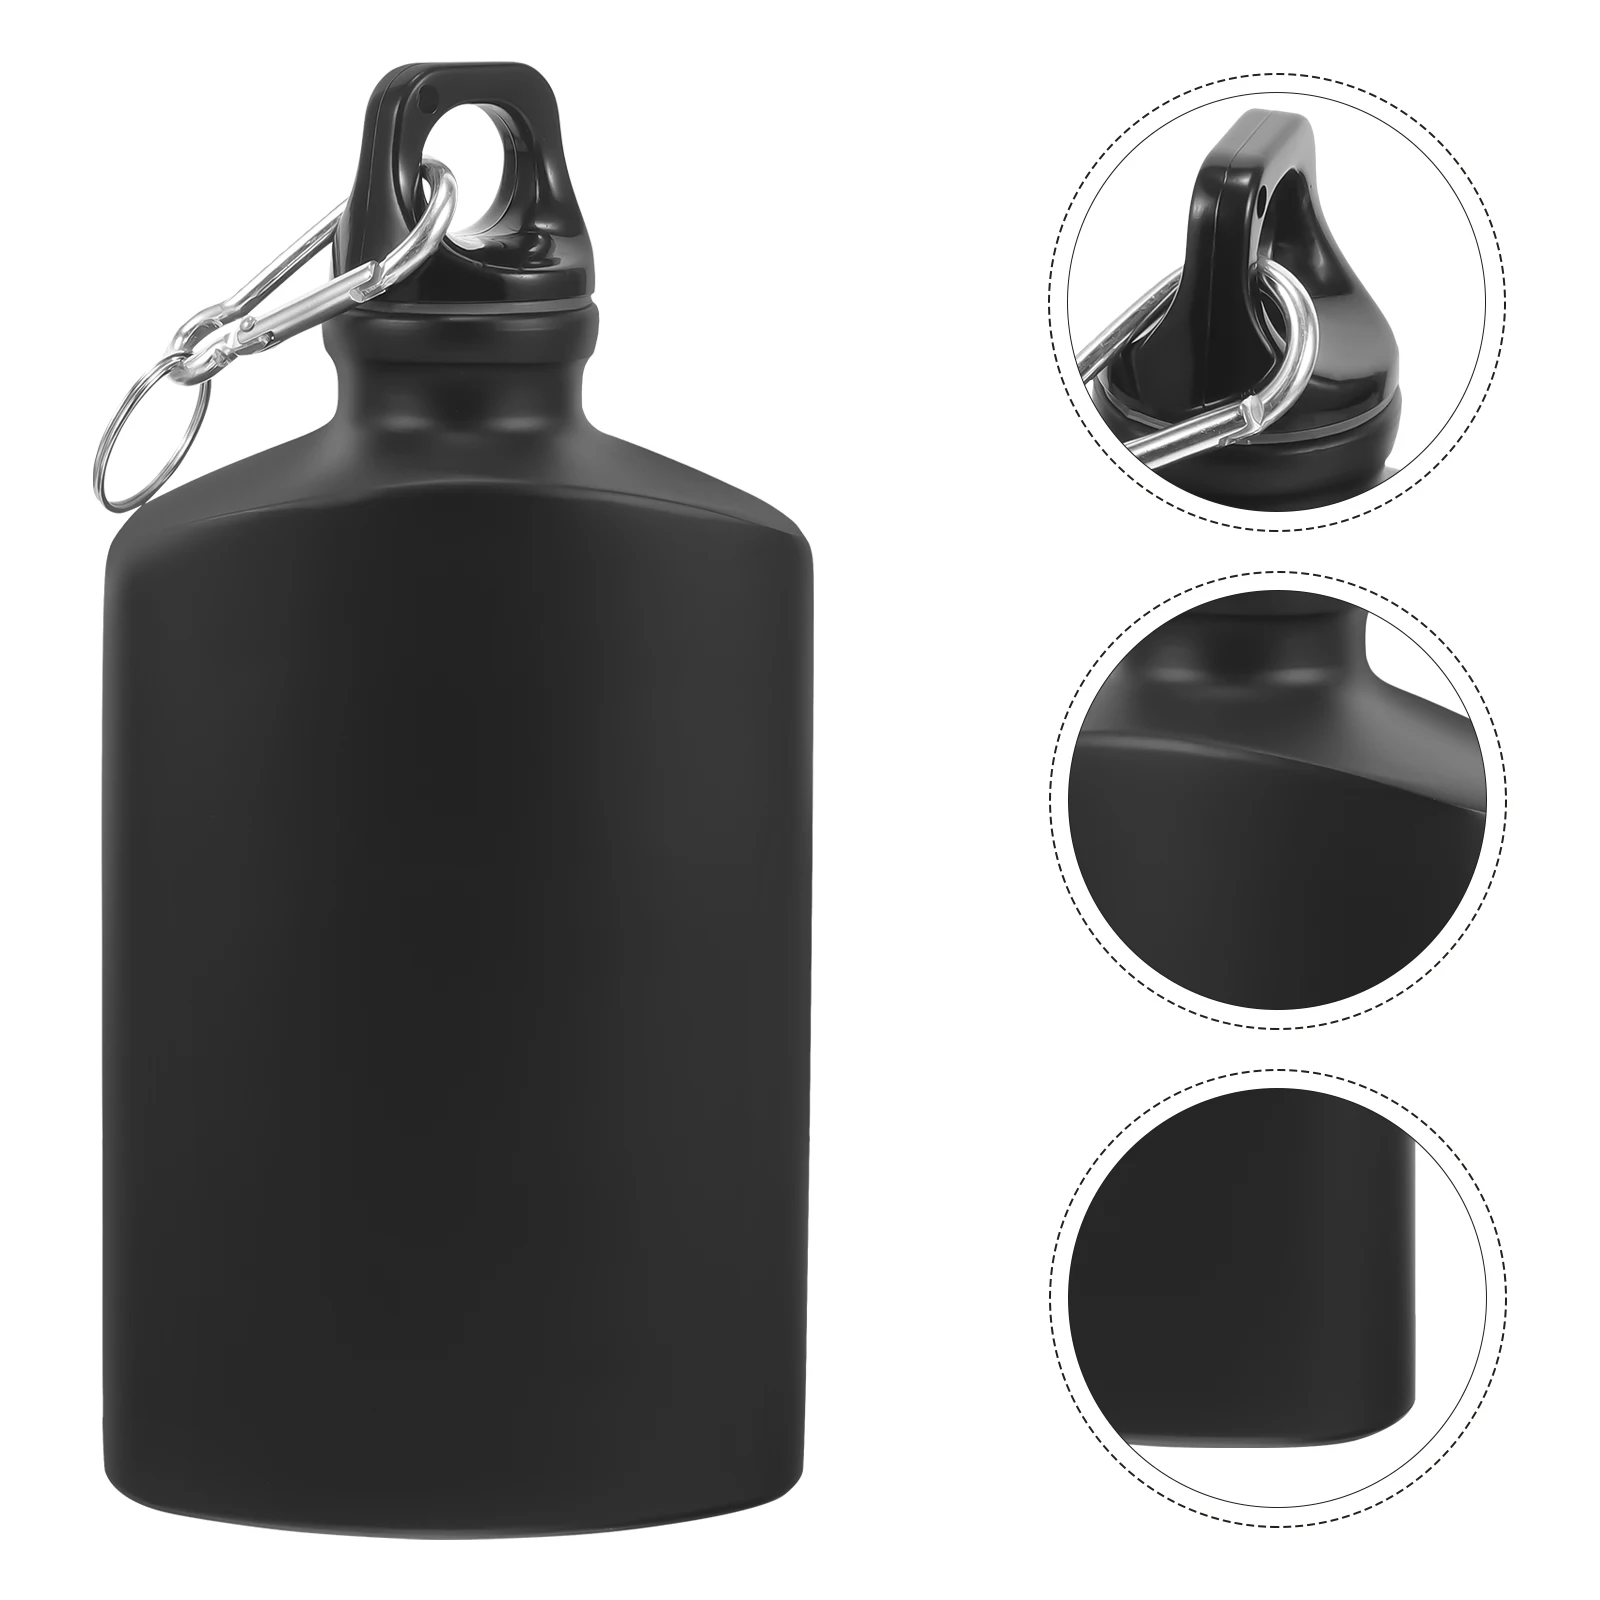 

500ml Camping Water Bottle Multi-use Water Canteen Aluminum alloy Military Bottle Outdoor Accessory Black